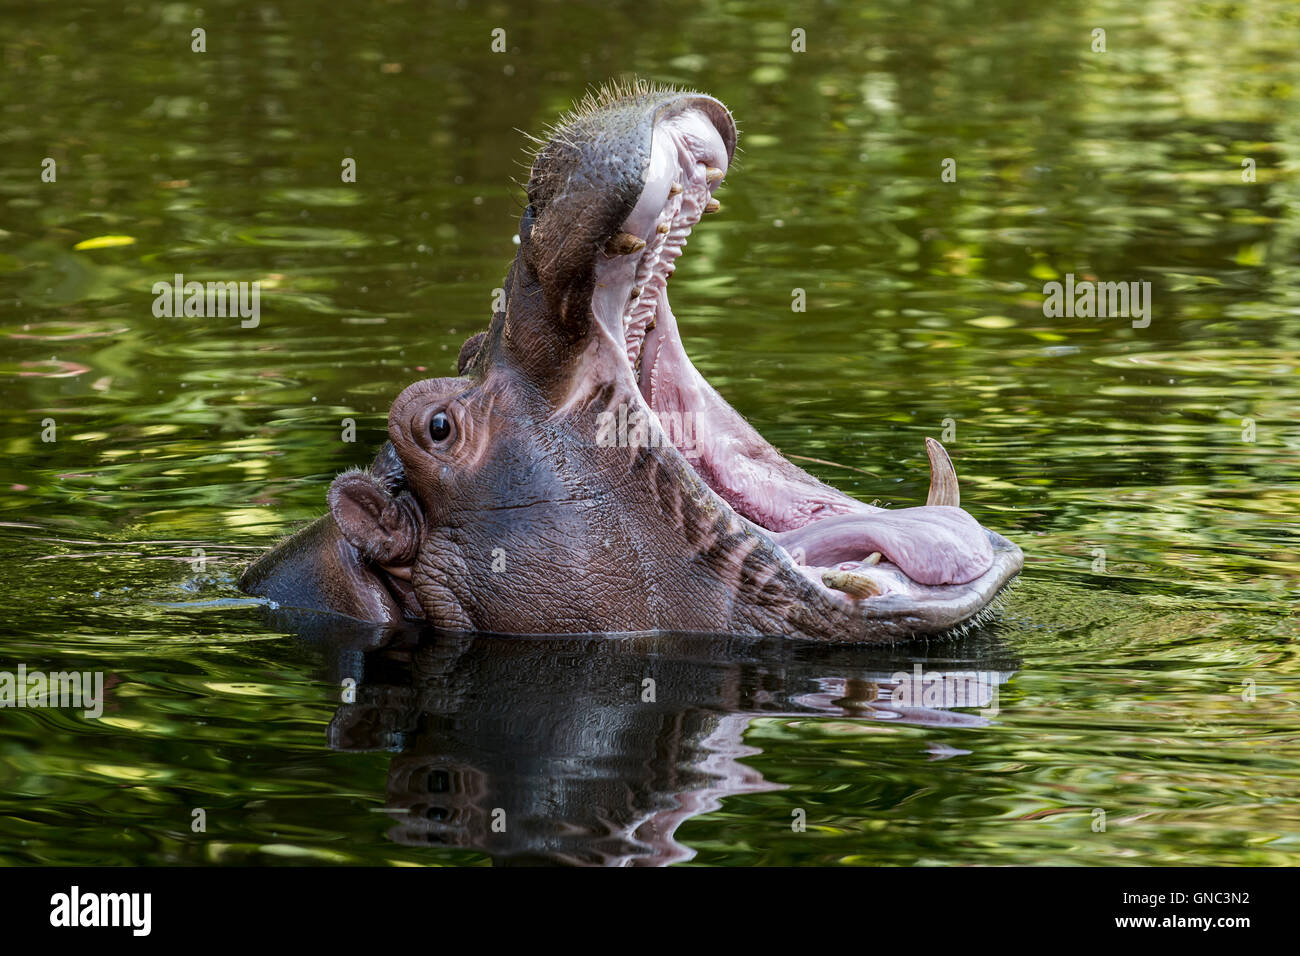 Close up of common hippopotamus (Hippopotamus amphibius) in pond yawning and showing teeth in open mouth Stock Photo